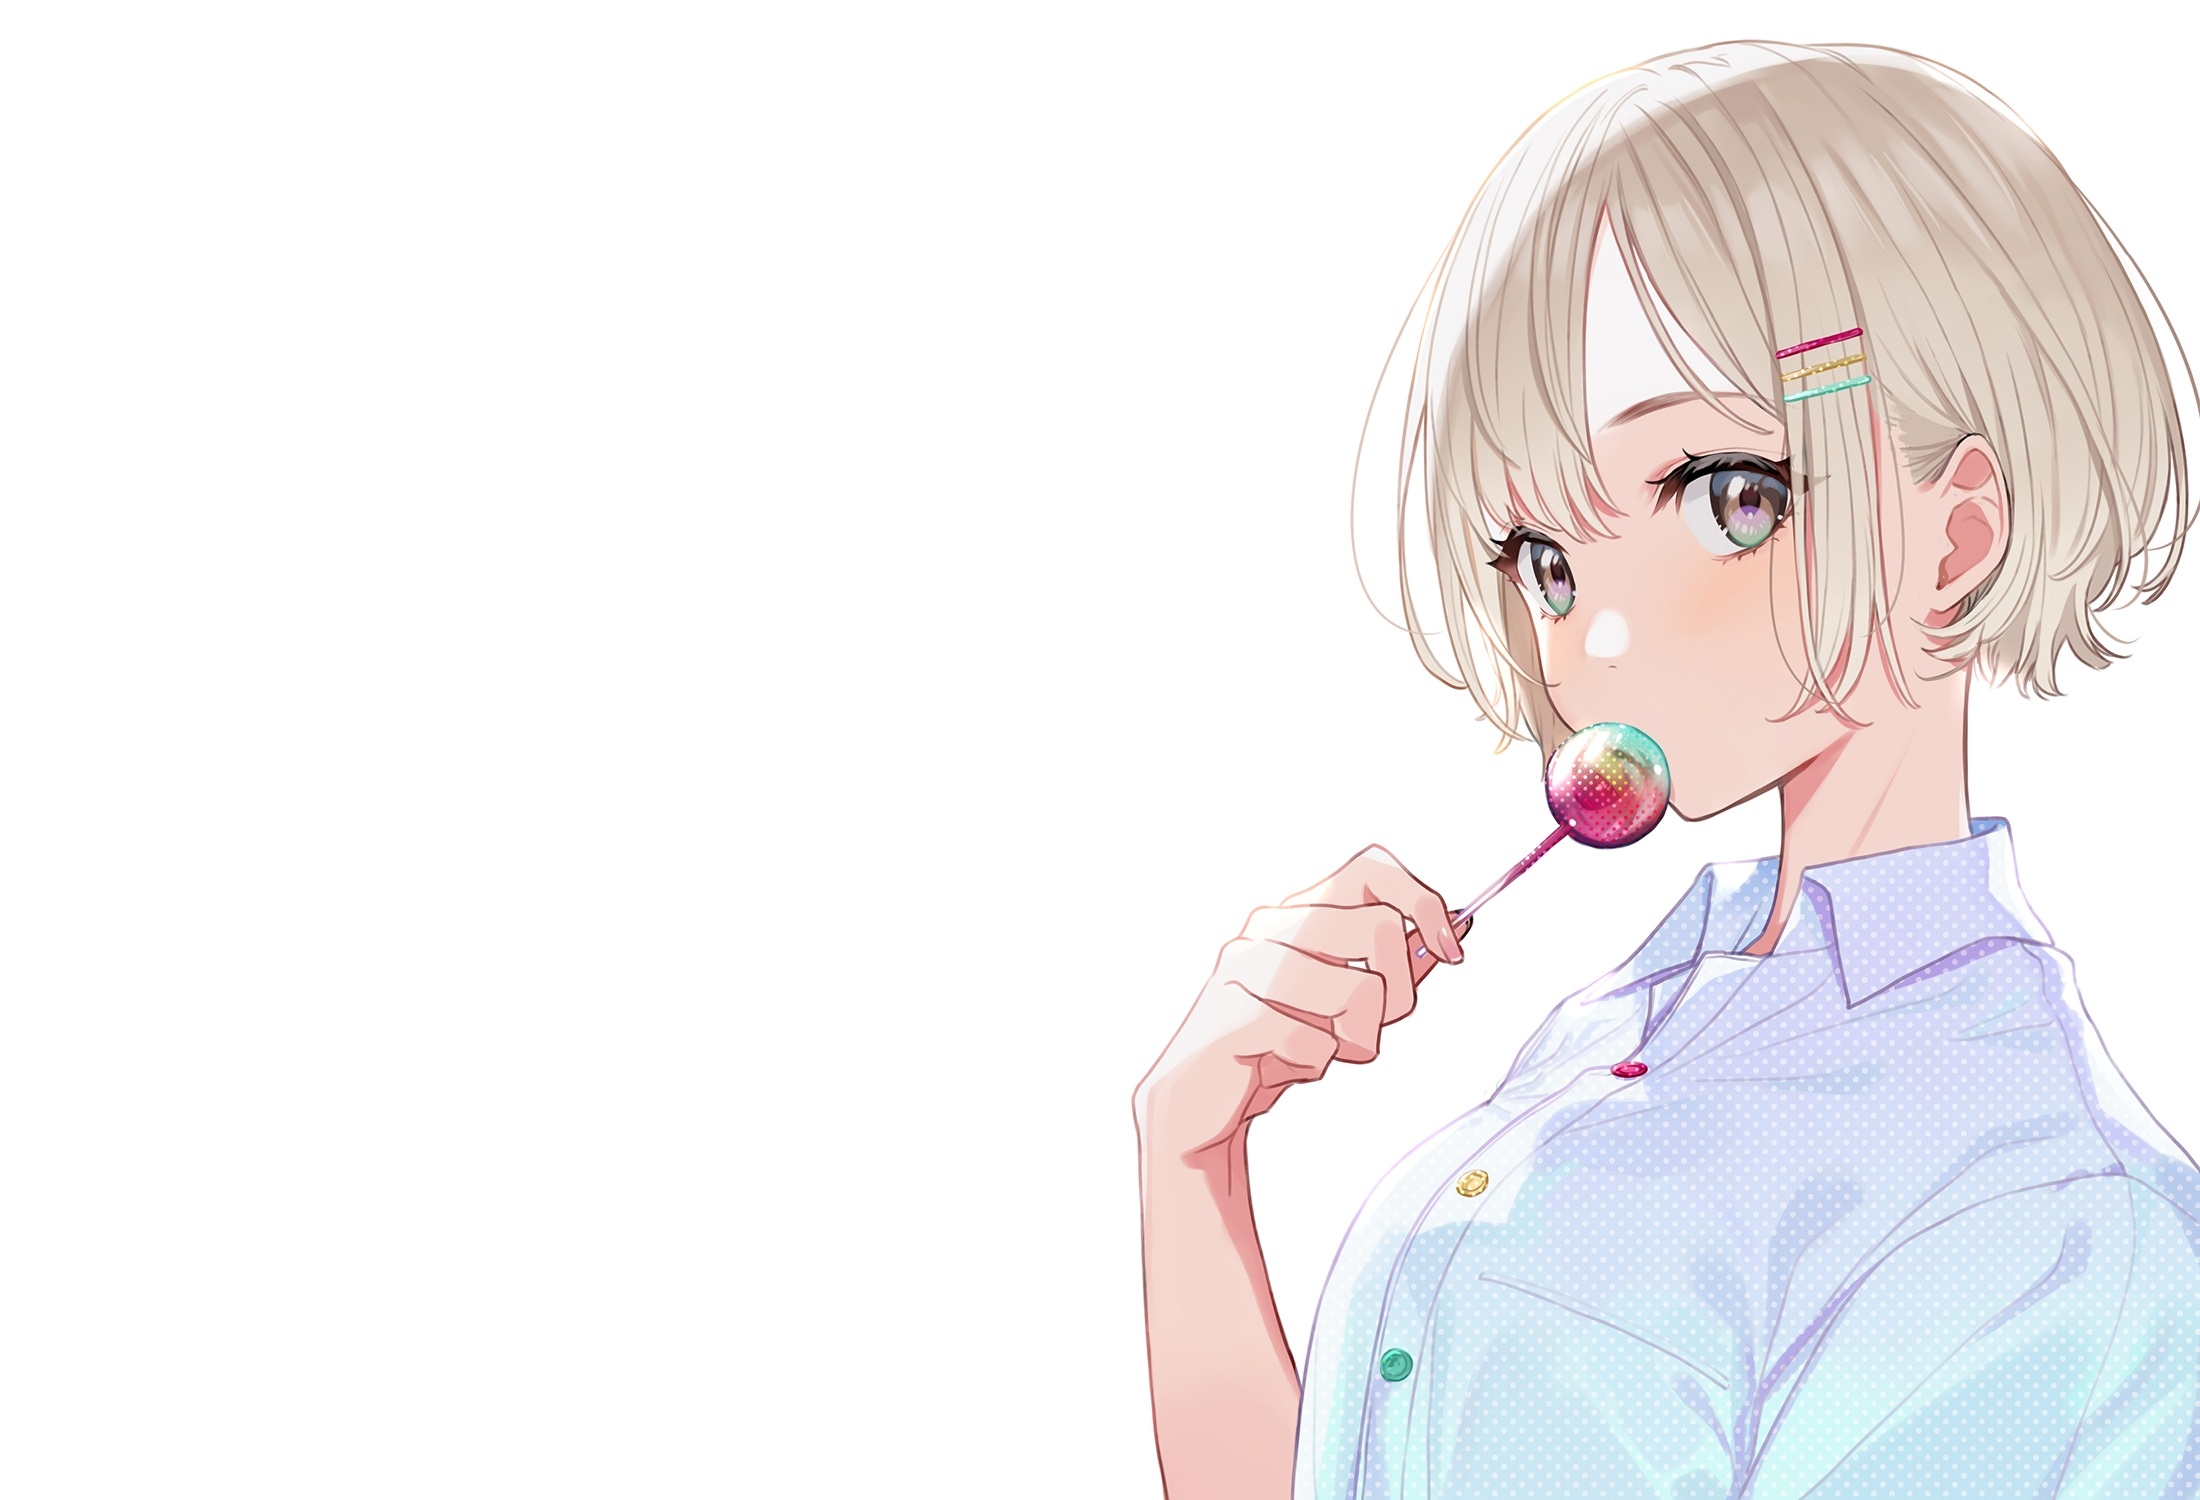 Digital Art Anime Side View Looking At Viewer Lolipop Brown Eyes White  Background Hair Pins Blonde S Wallpaper - Resolution:2200x1500 - ID:1225134  